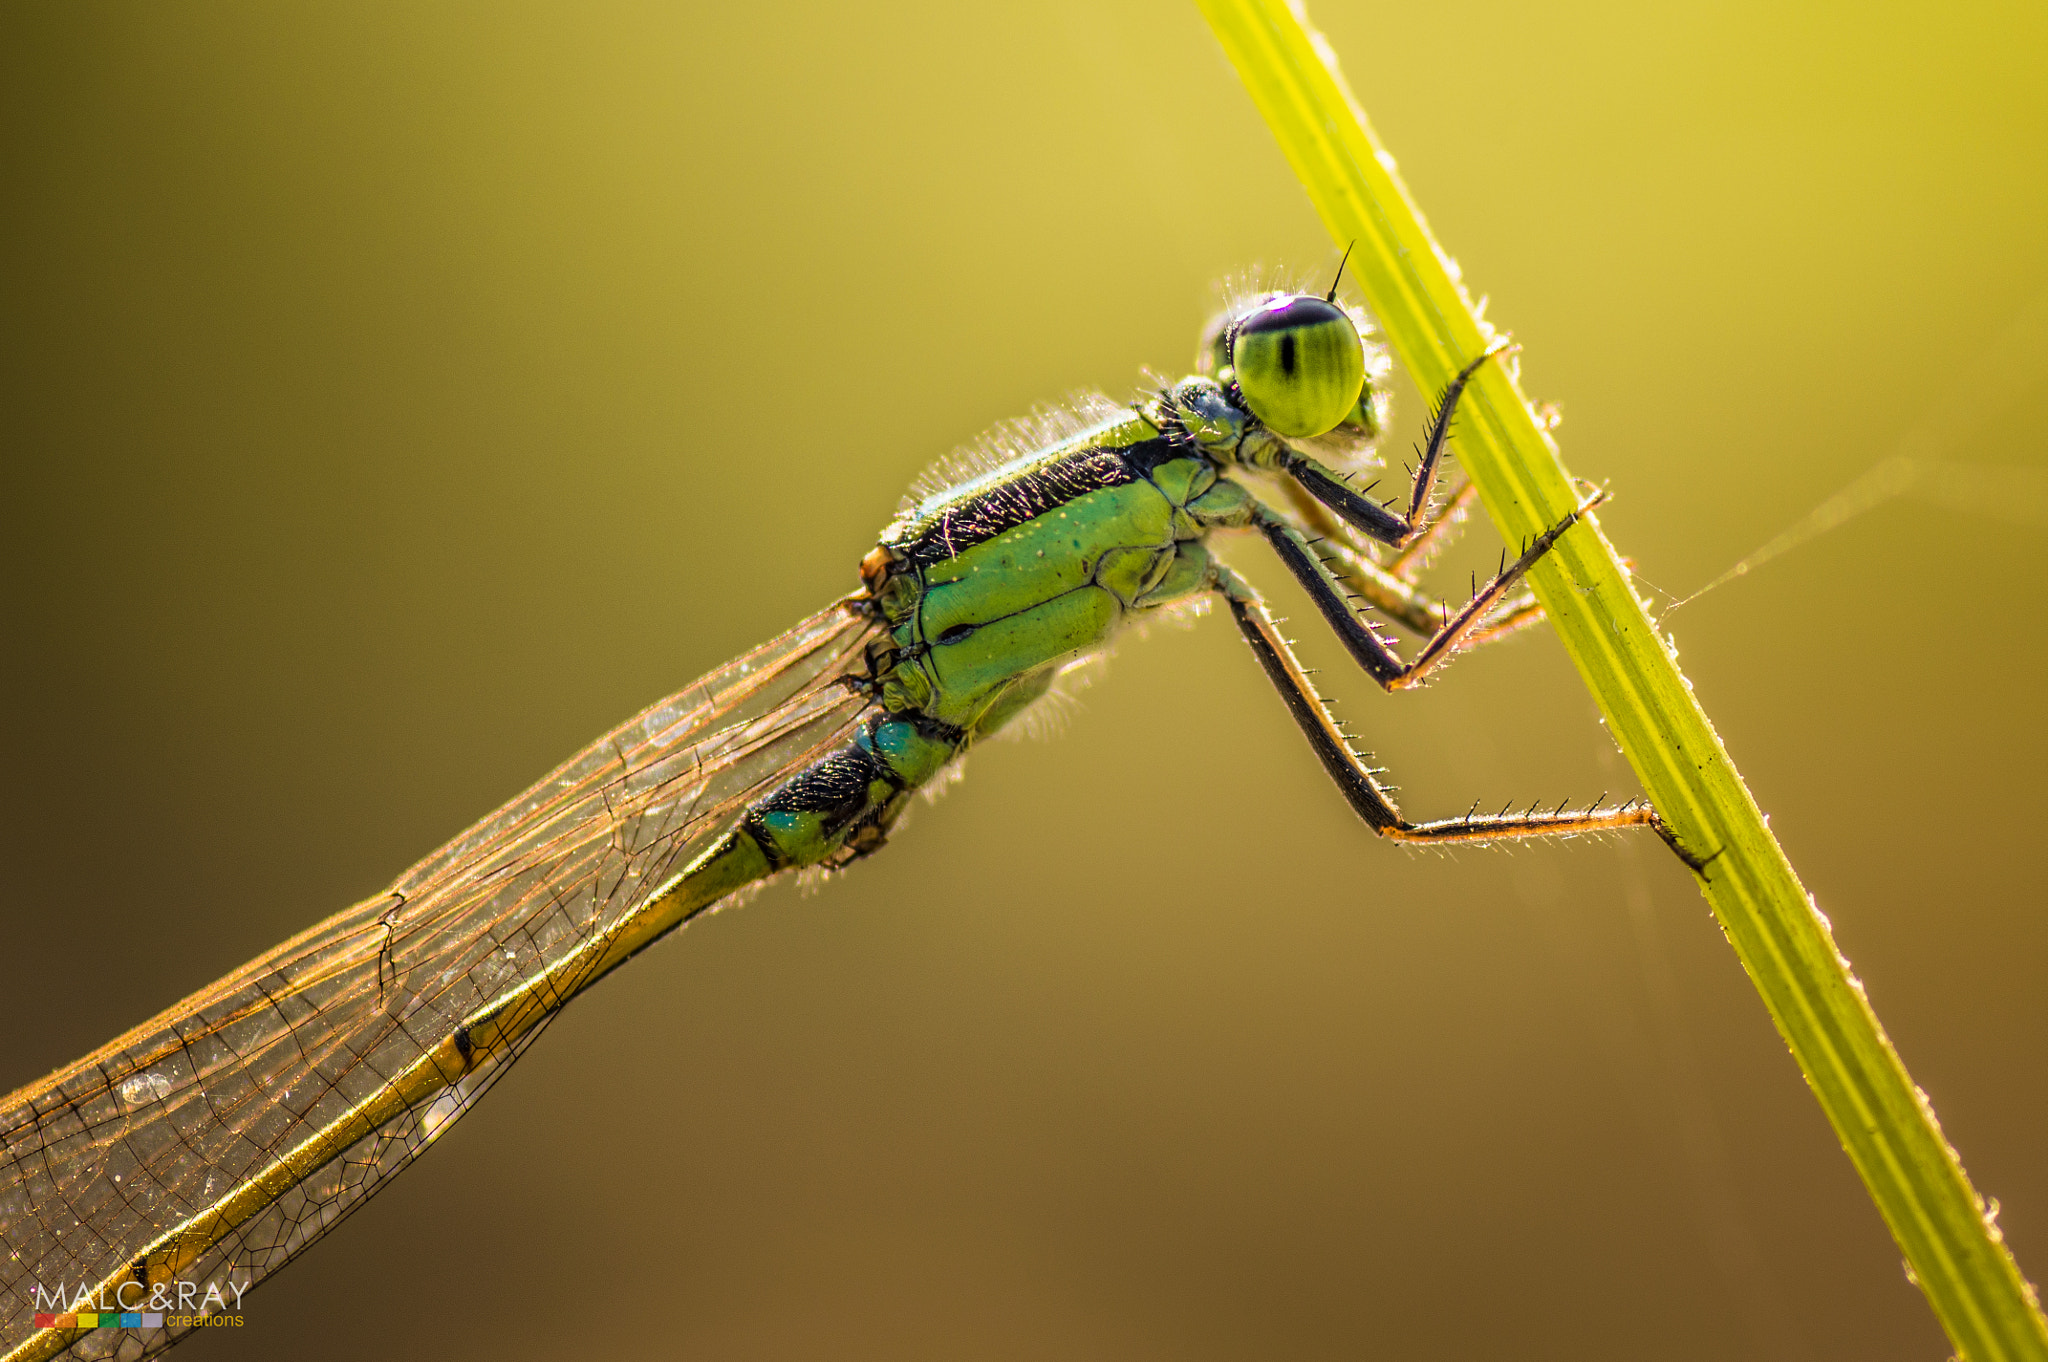 Nikon D3200 + Tamron SP 90mm F2.8 Di VC USD 1:1 Macro sample photo. Dragonfly in action photography